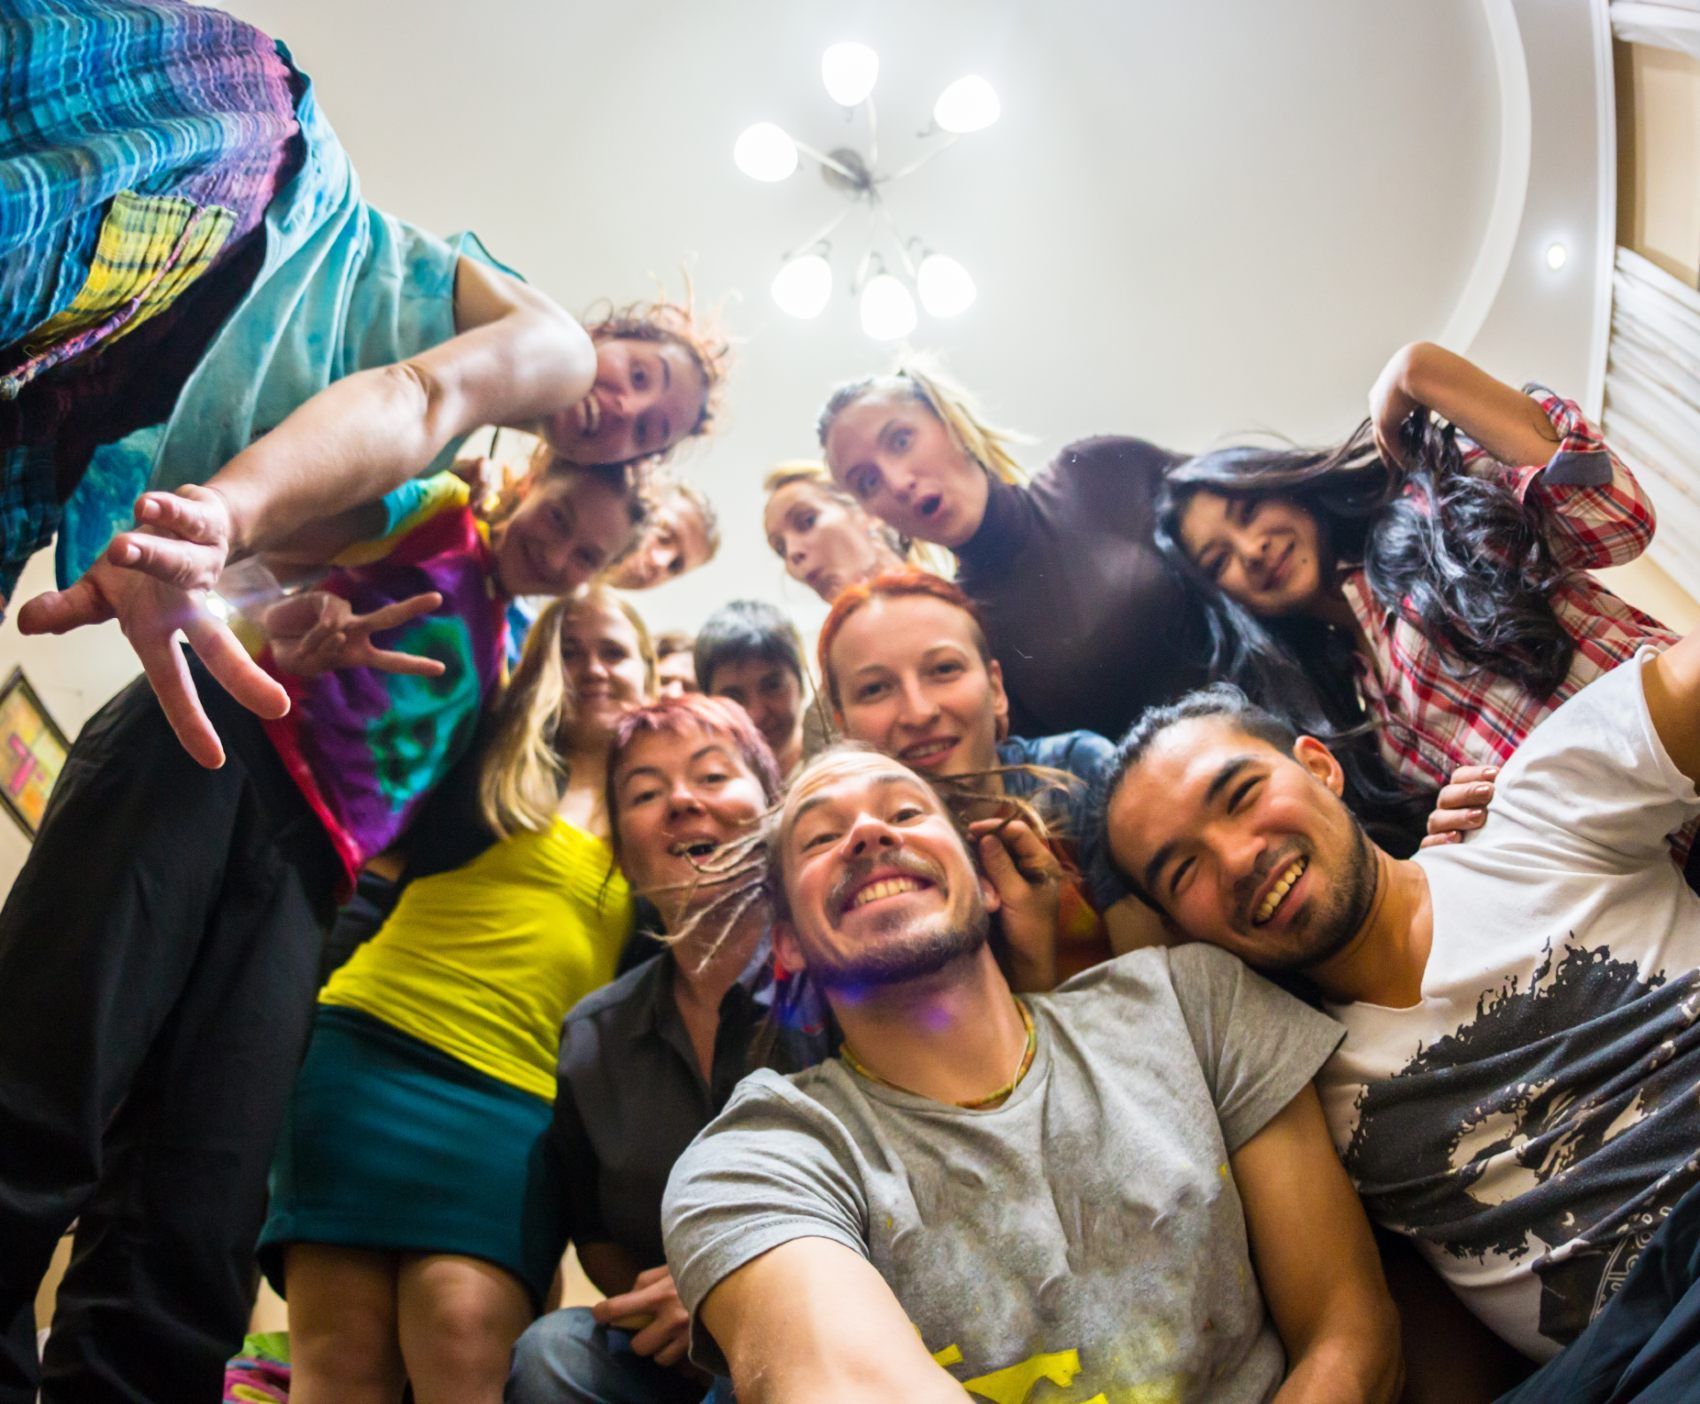 People take a group selfie at a house party - super-spreader events